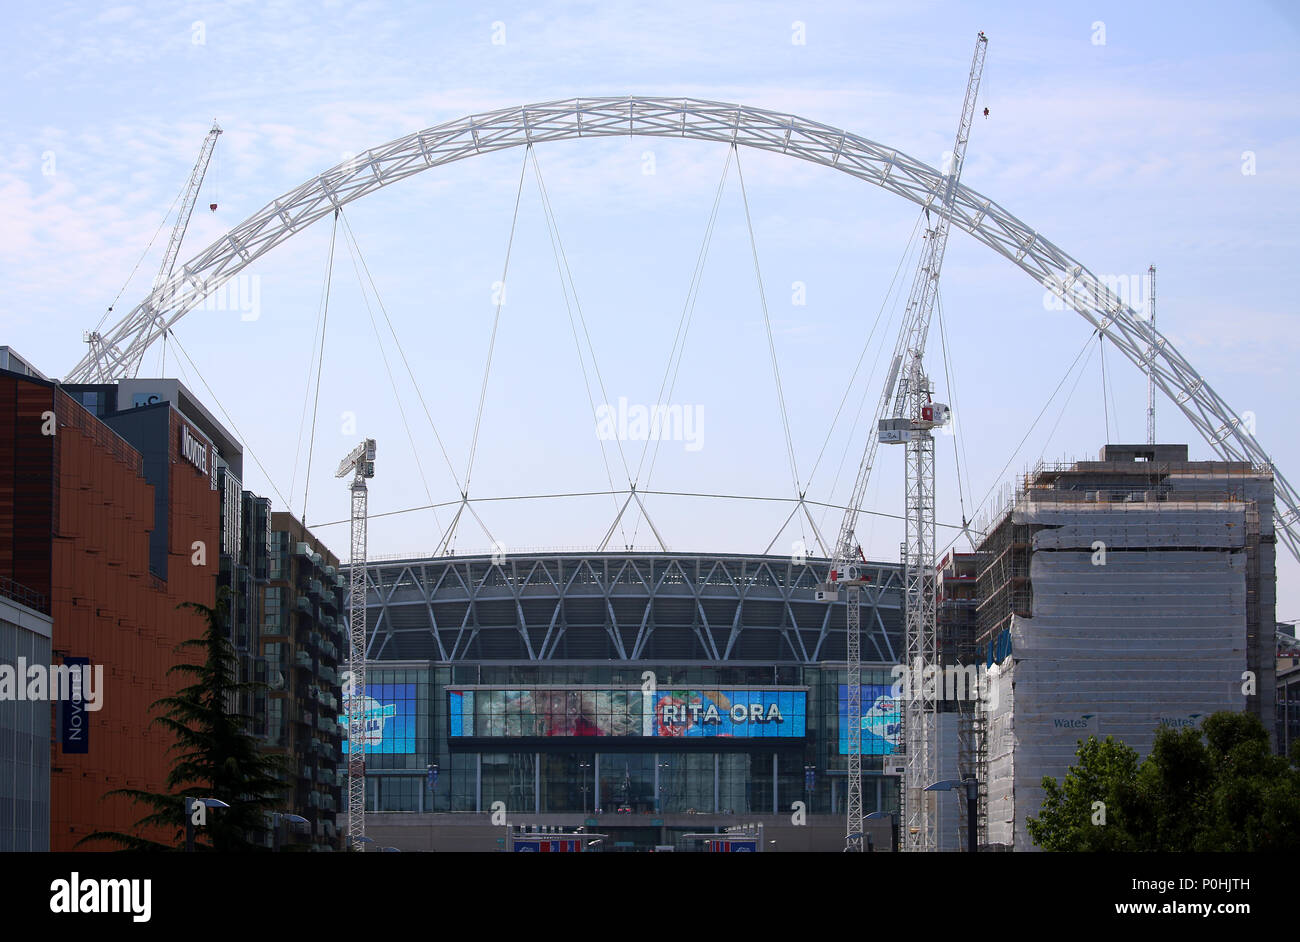 General view outside the stadium ahead of Capital's Summertime Ball with Vodafone at Wembley Stadium, London. PRESS ASSOCIATION Photo. This summer's hottest artists performed live for 80,000 Capital listeners at Wembley Stadium at the UK's biggest summer party. Performers included Camila Cabello, Shawn Mendes, Rita Ora, Charlie Puth, Jess Glyne, Craig David, Anne-Marie, Rudimental, Sean Paul, Clean Bandit, James Arthur, Sigala, Years & Years, Jax Jones, Raye, Jonas Blue, Mabel, Stefflon Don, Yungen and G-Eazy. Picture date: Saturday June 9, 2018. Photo credit should read: Isabel Infantes/PA Wi Stock Photo